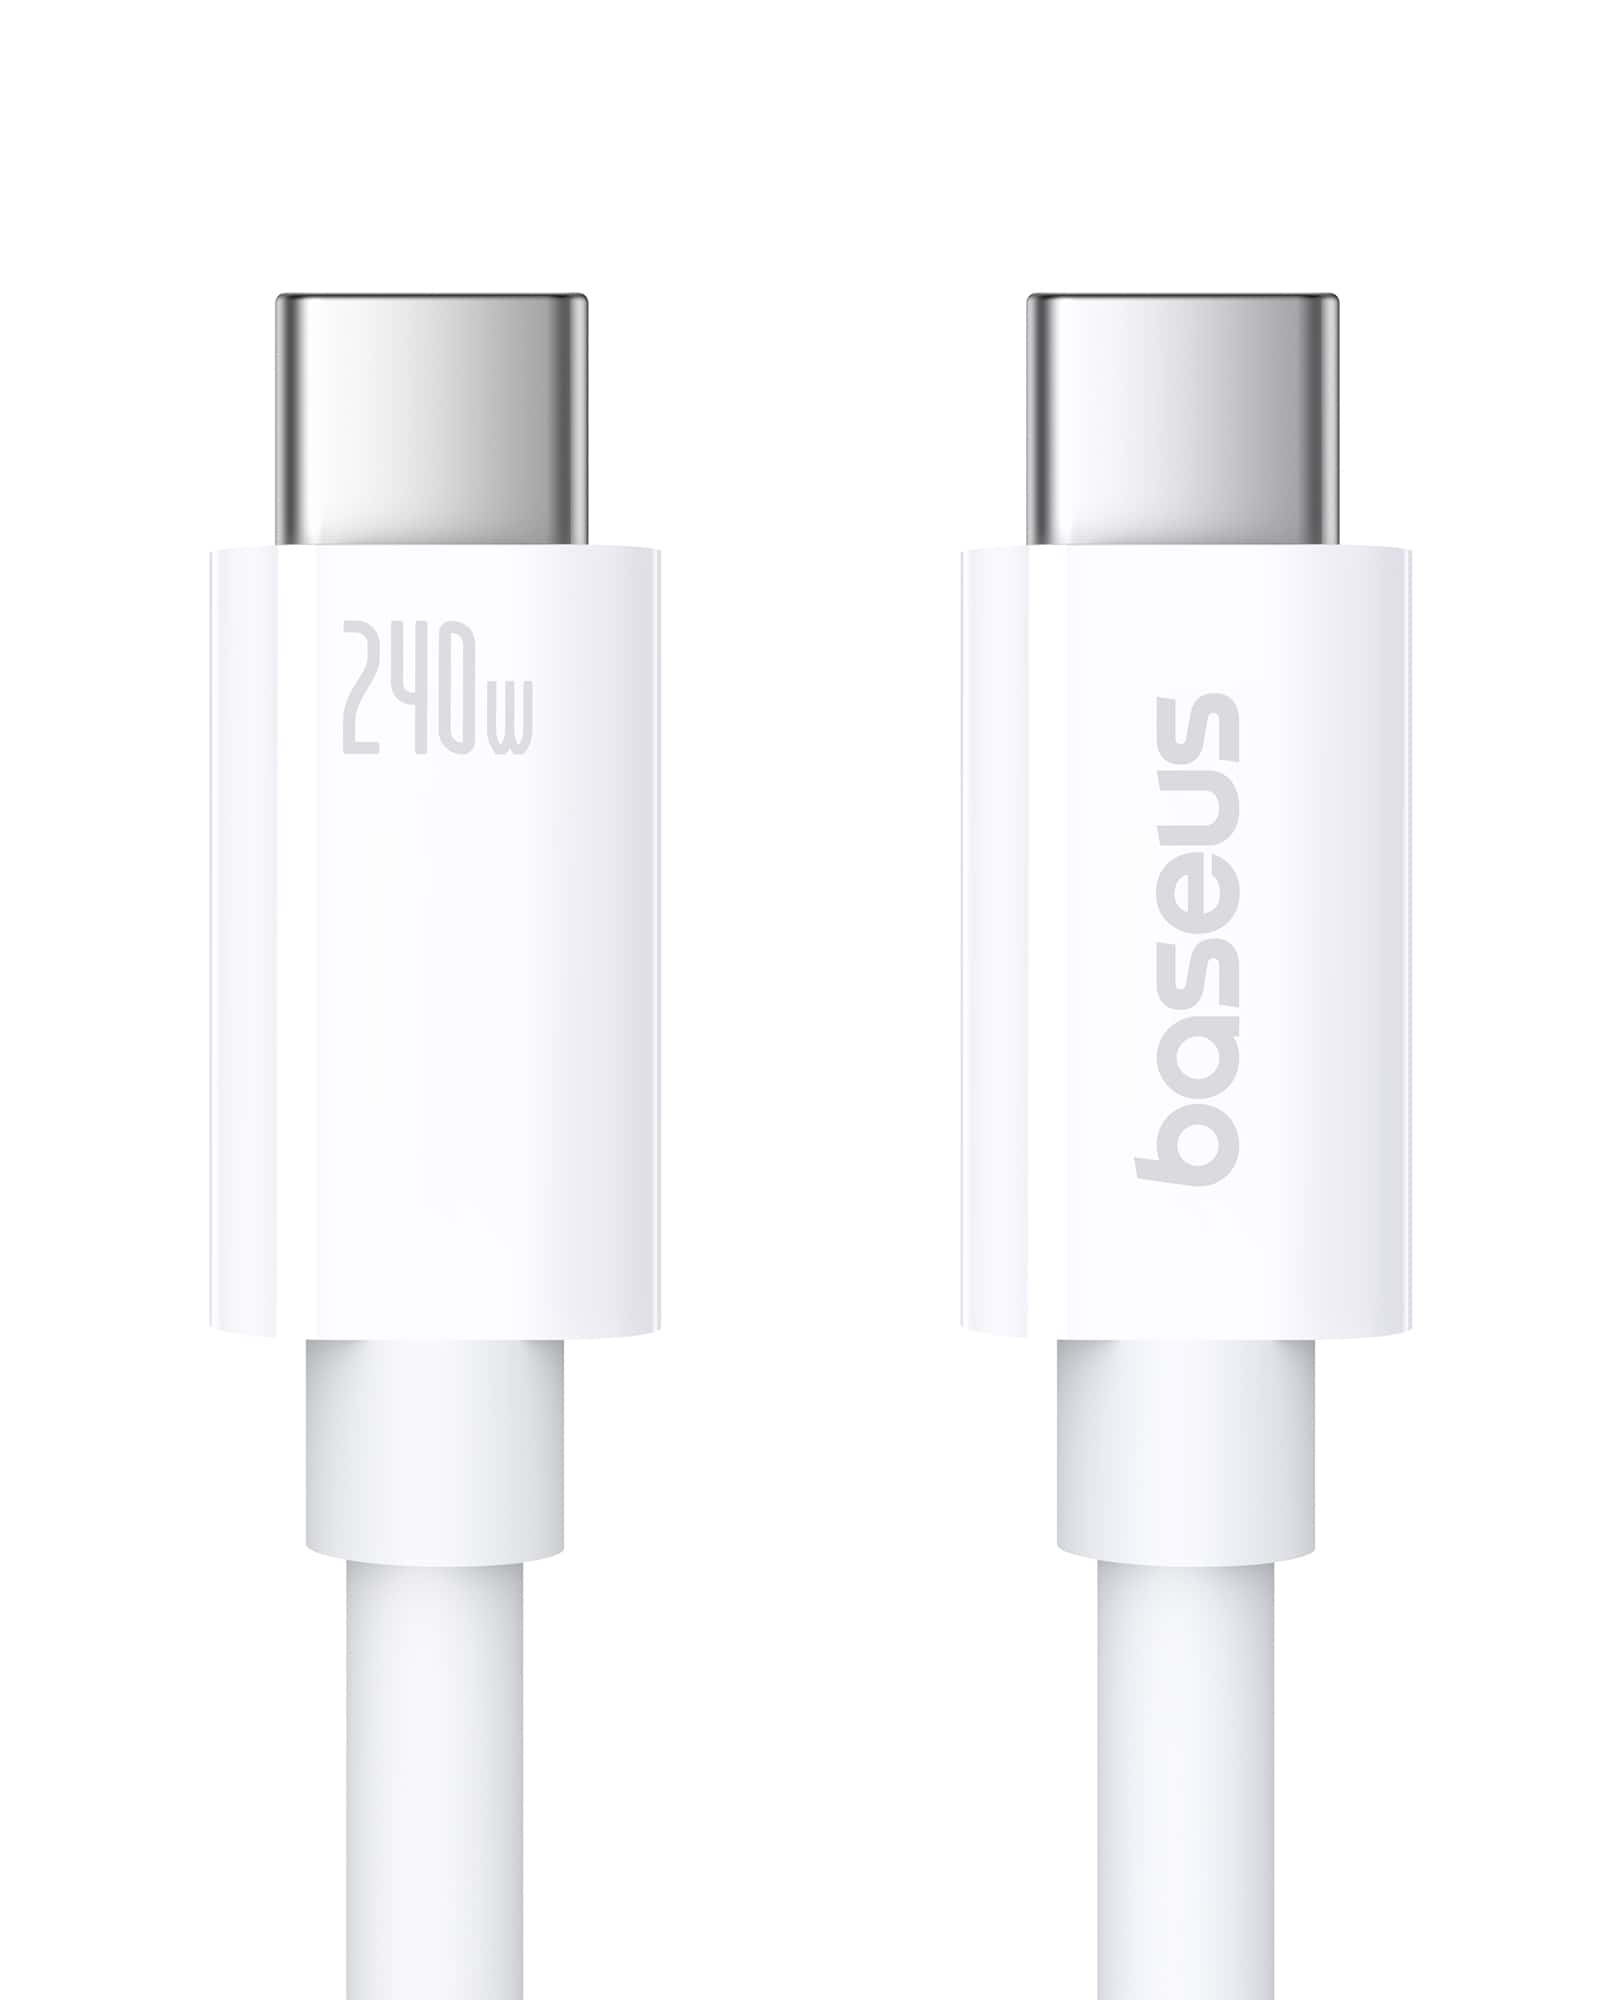 Basues Superior Series 2 USB4 Full-Function Fast Charging Cable Type-C to Type-C 240W